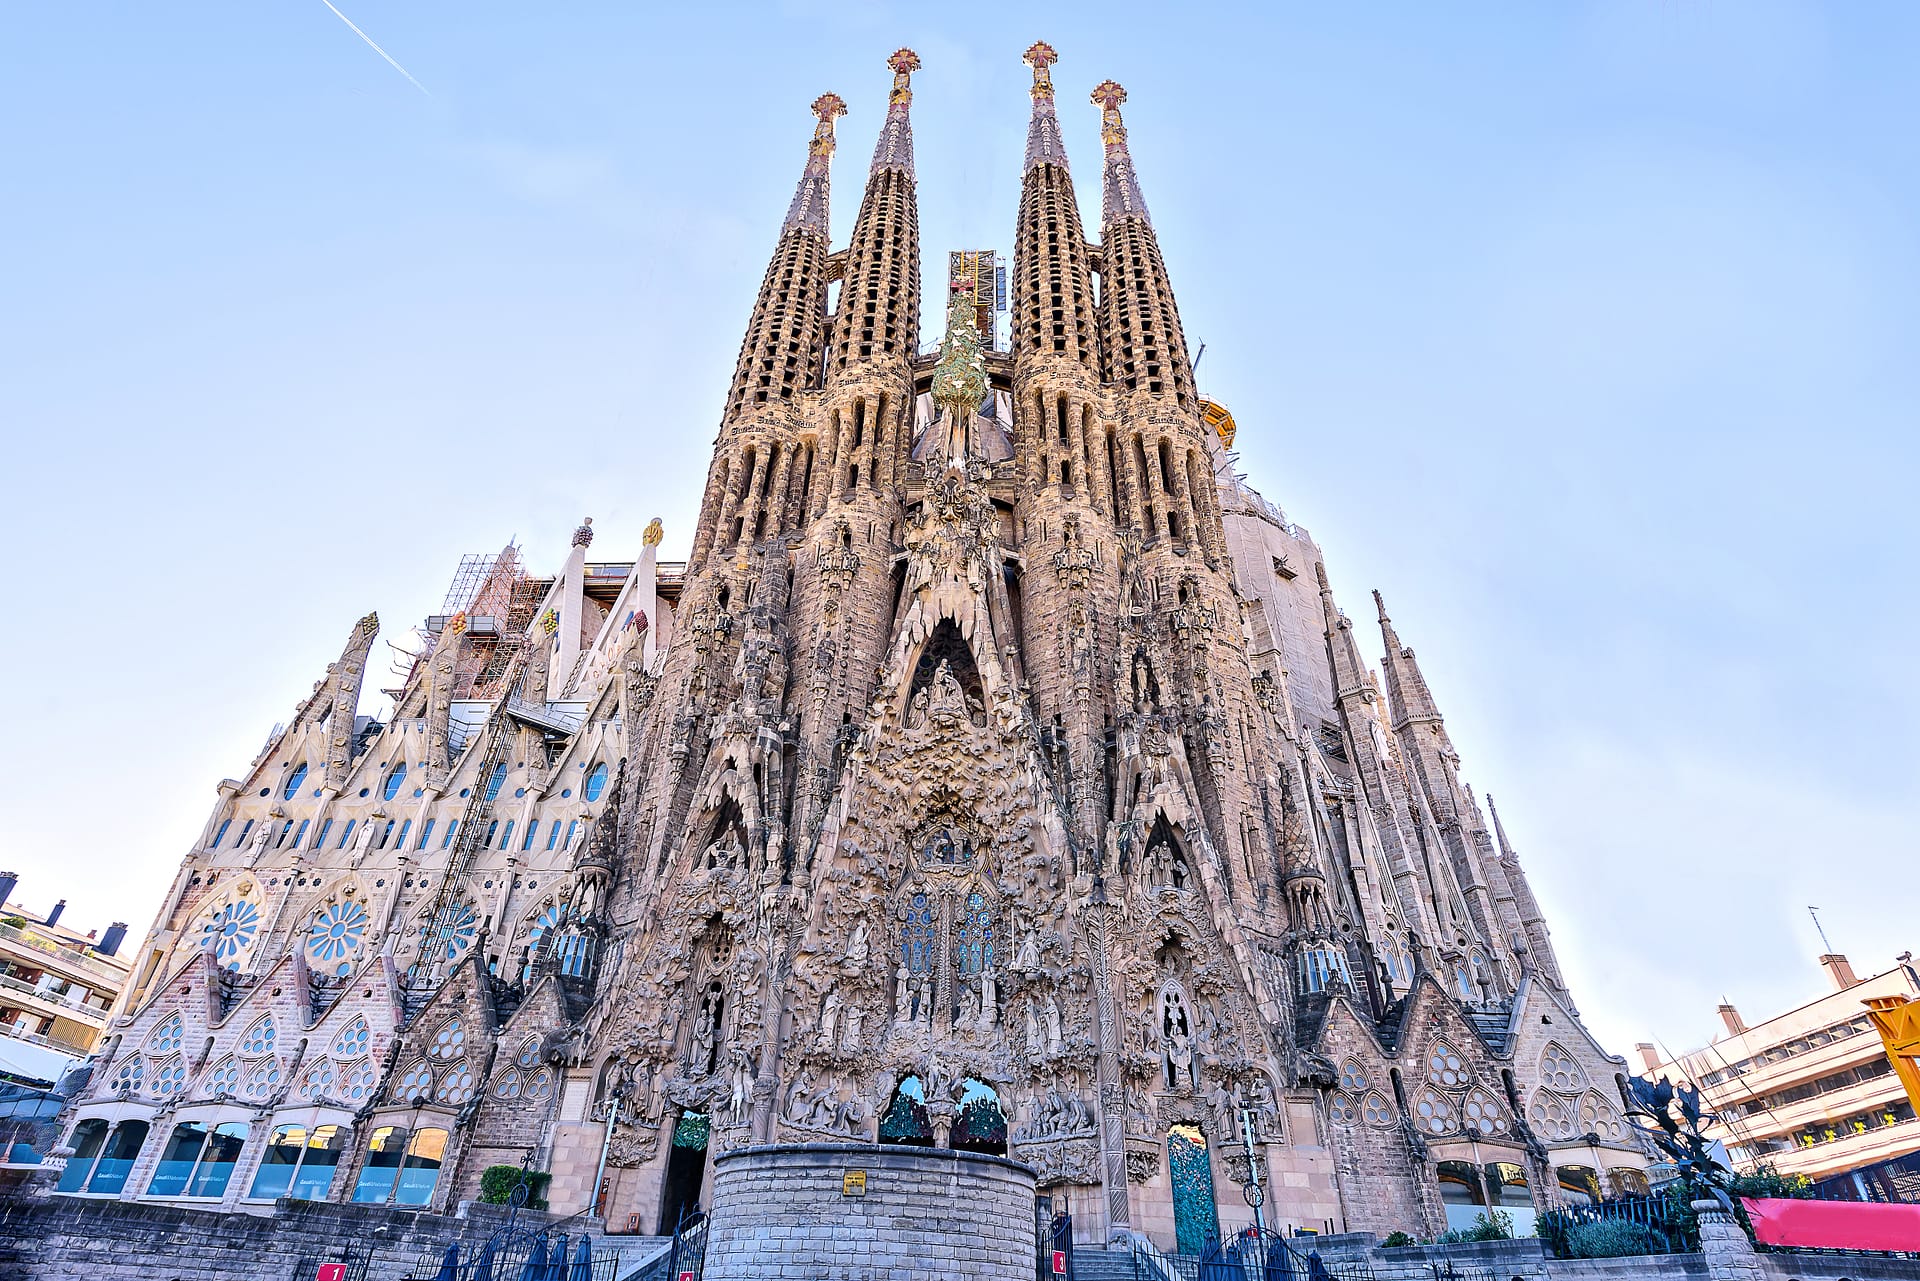 La Sagrada Familia, Nativity Facade - the famous cathedral that is designed by Gaudi, which is being build since 19 March 1882